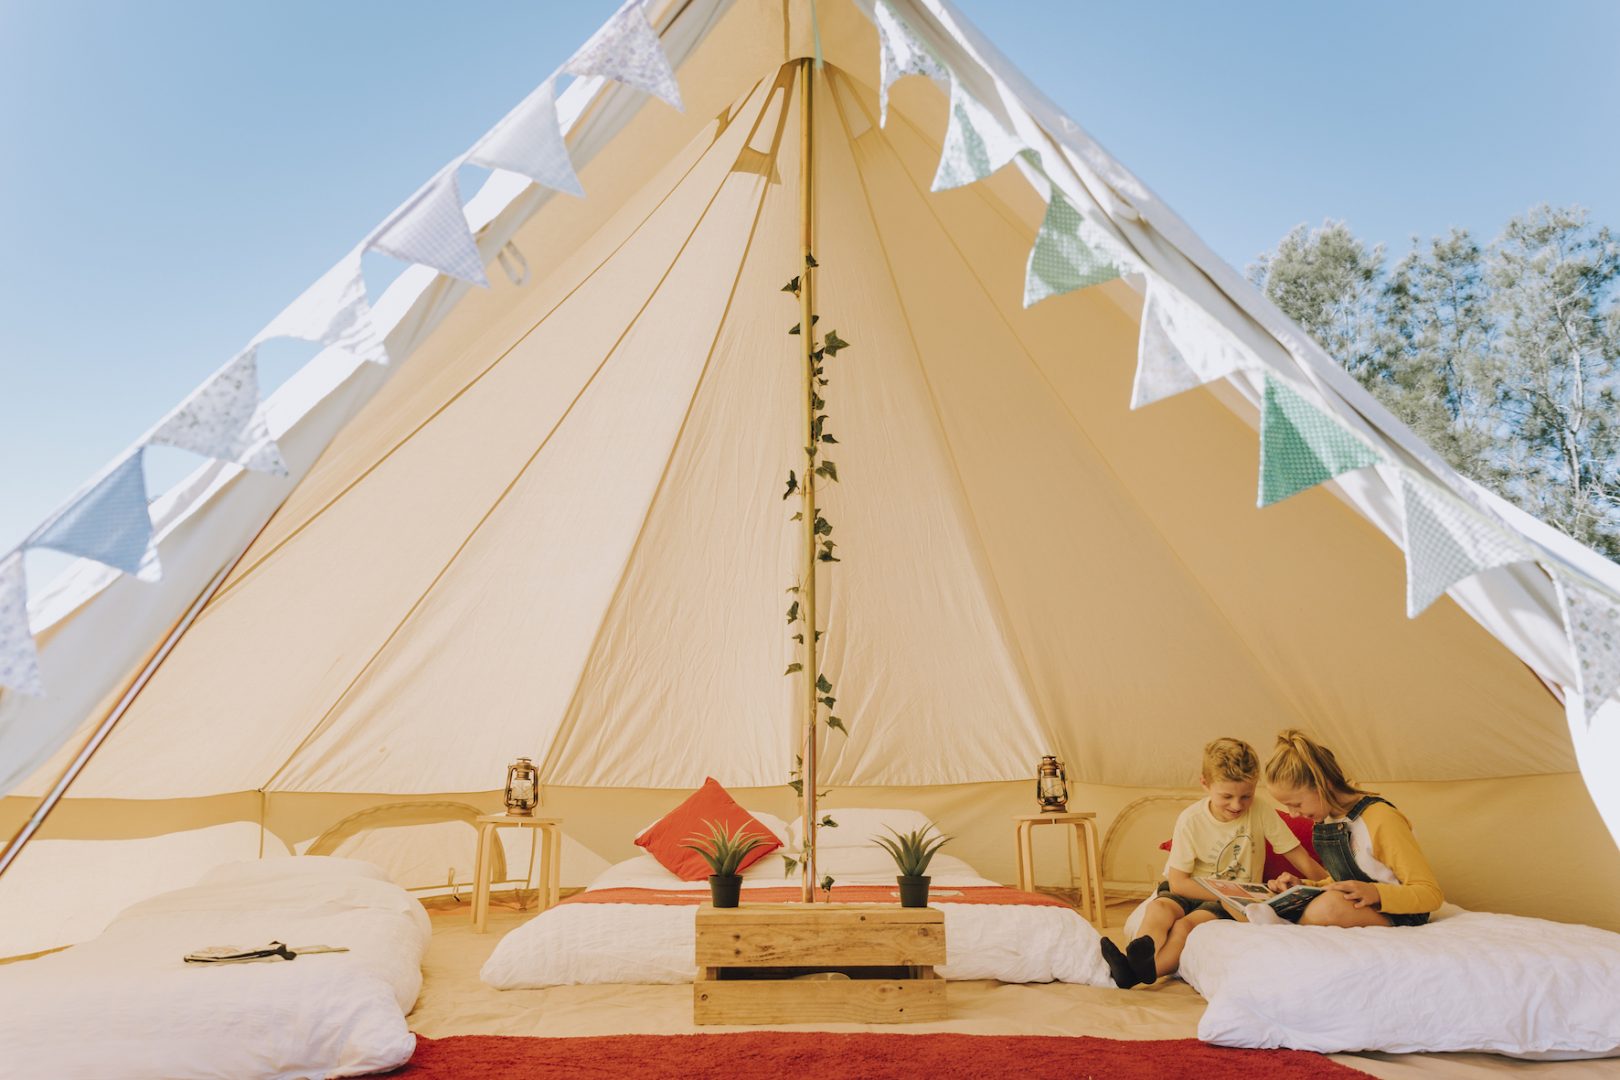 Easter glamping! A new pop-up glamping experience for the family at NRMA Port Macquarie Breakwall Holiday Park.